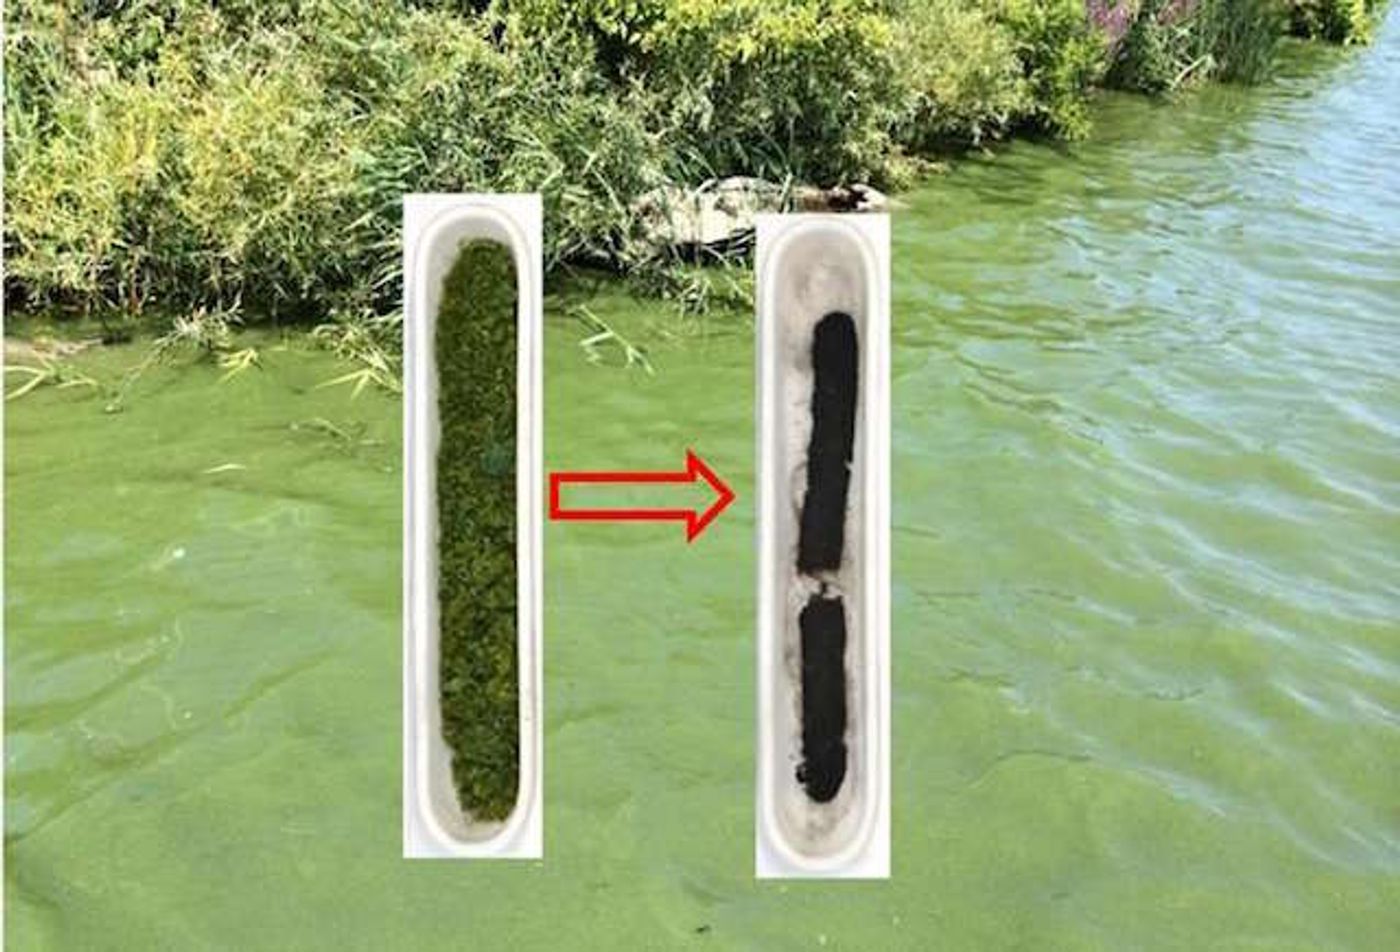 Algae collected from a bloom in Lake Erie and the "hard carbon" it was turned into